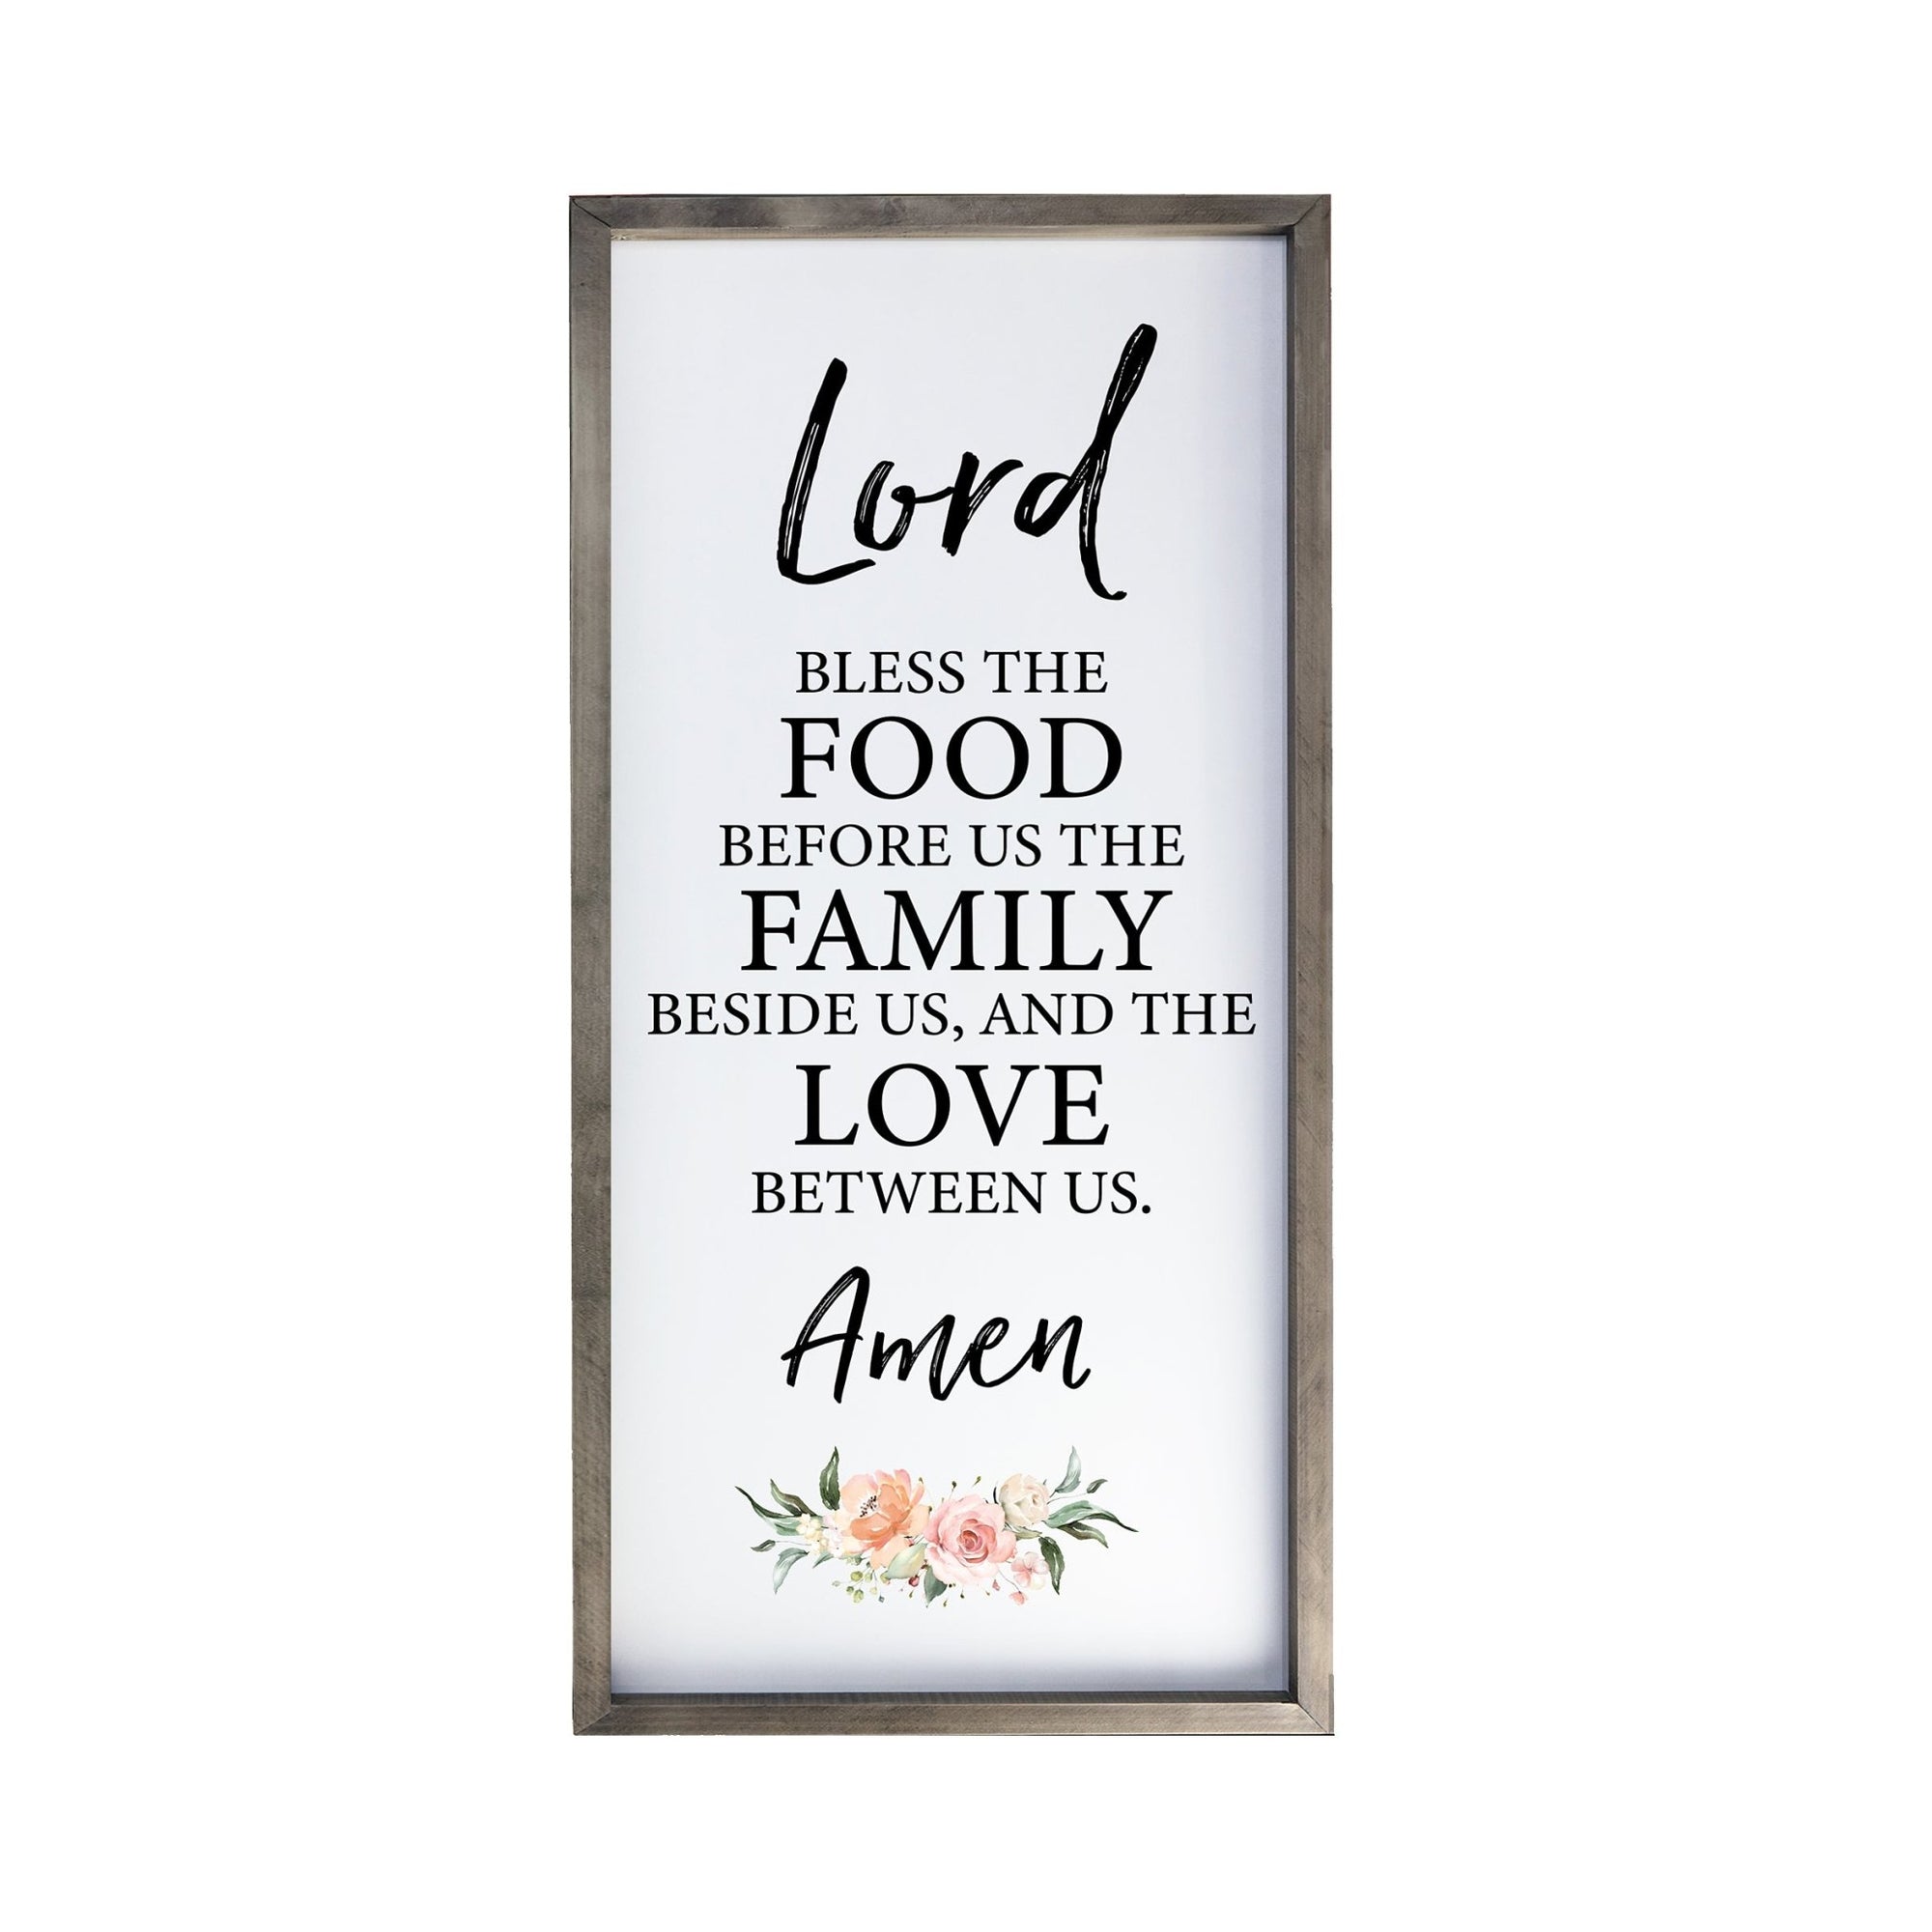 Large Family Wall Decor Quote Sign For Home 18 x 36 - Lord Bless The Food - LifeSong Milestones